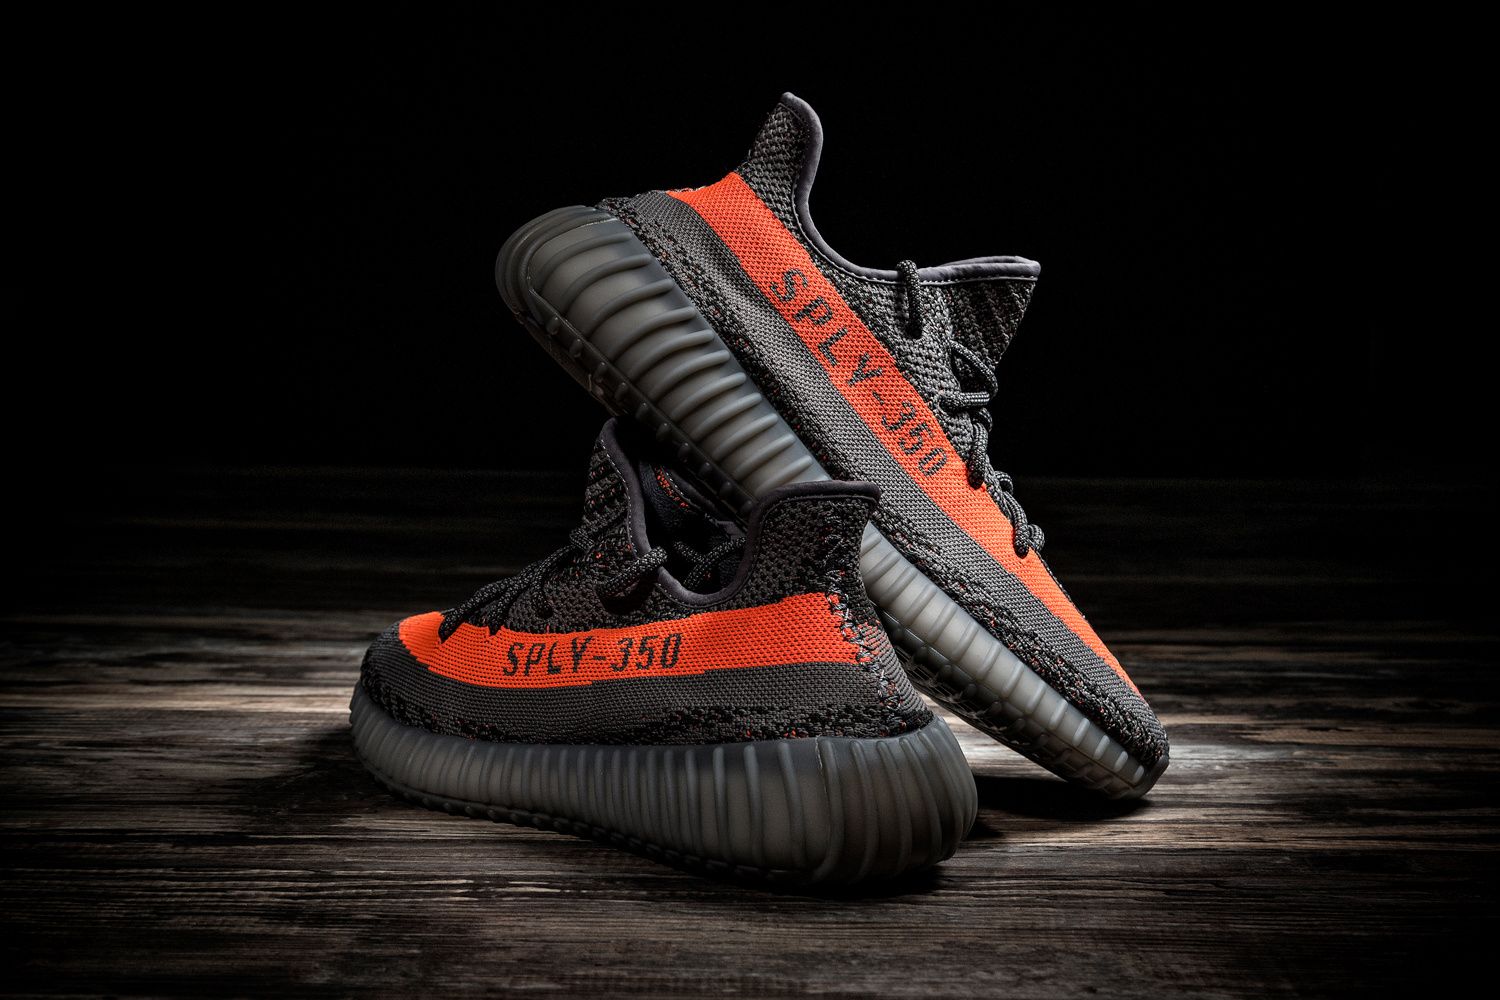 Free download YEEZY Boost 350 V2 Re Releases on HBX Archive HYPEBEAST [1500x1000] for your Desktop, Mobile & Tablet. Explore Yeezy Wallpaper. Yeezy Wallpaper, Yeezy Boost Wallpaper, Yeezy Wallpaper